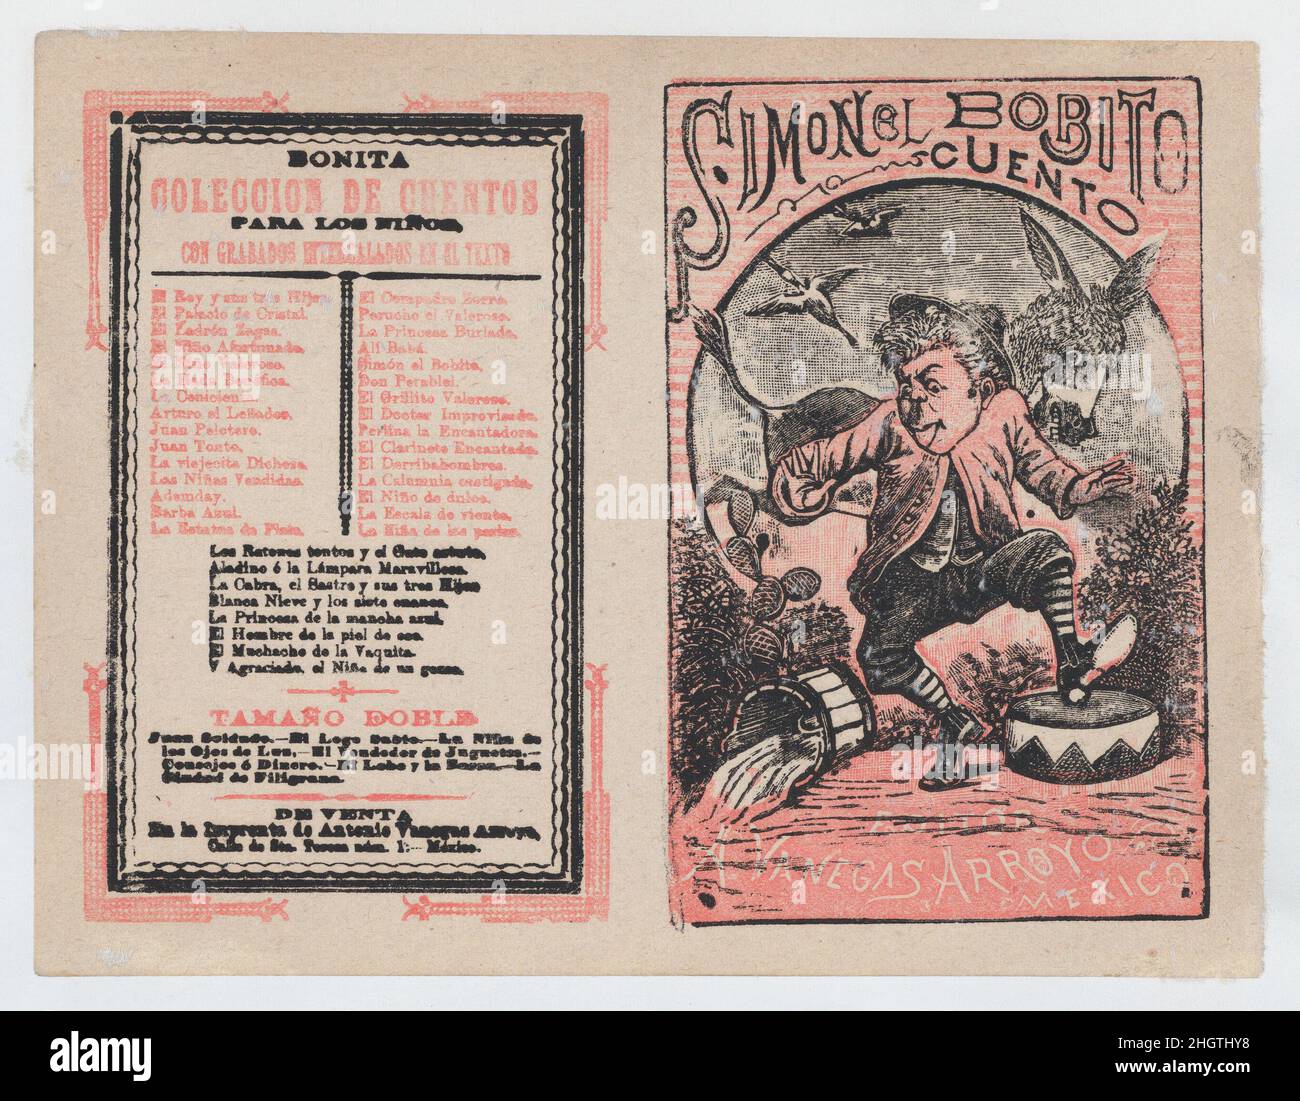 Cover for 'Simonel Bobito', a man stomping and a donkey in the background ca. 1890–1910 José Guadalupe Posada. Cover for 'Simonel Bobito', a man stomping and a donkey in the background. José Guadalupe Posada (Mexican, 1851–1913). ca. 1890–1910. Photo-relief and letterpress printed in red and black ink on beige paper. Antonio Vanegas Arroyo (1850–1917, Mexican). Prints Stock Photo